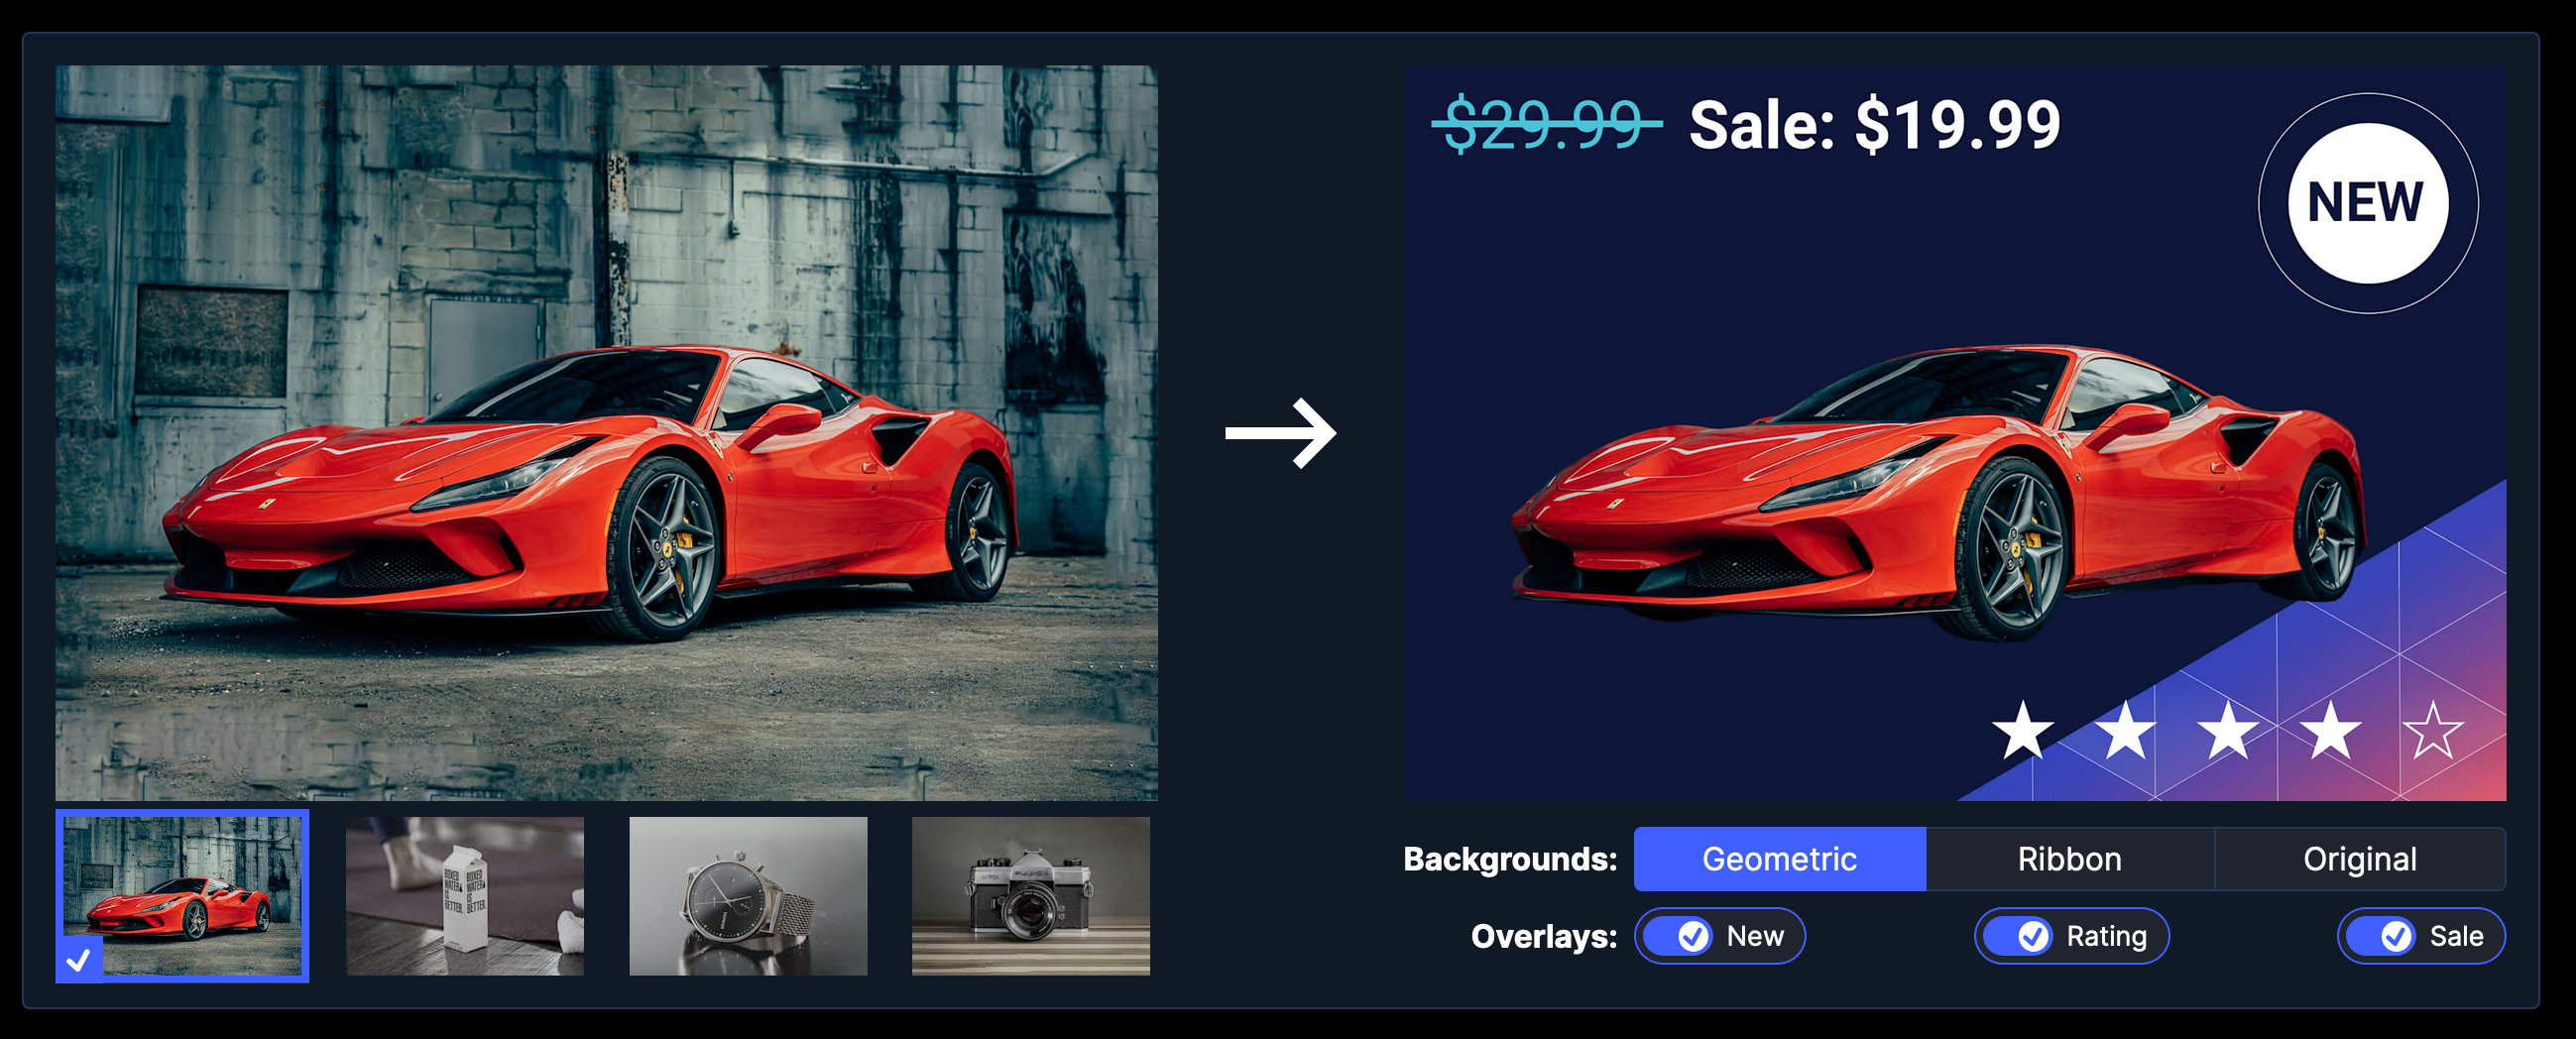 A screenshot of the personalization use case demo: It shows two pictures of a red car. The picture on the left is a regular photograph. The picture on the right has had the background replaced with a dark geometric pattern. It also has a star rating, price and 'New' badge. Under the photos, controls are shown.